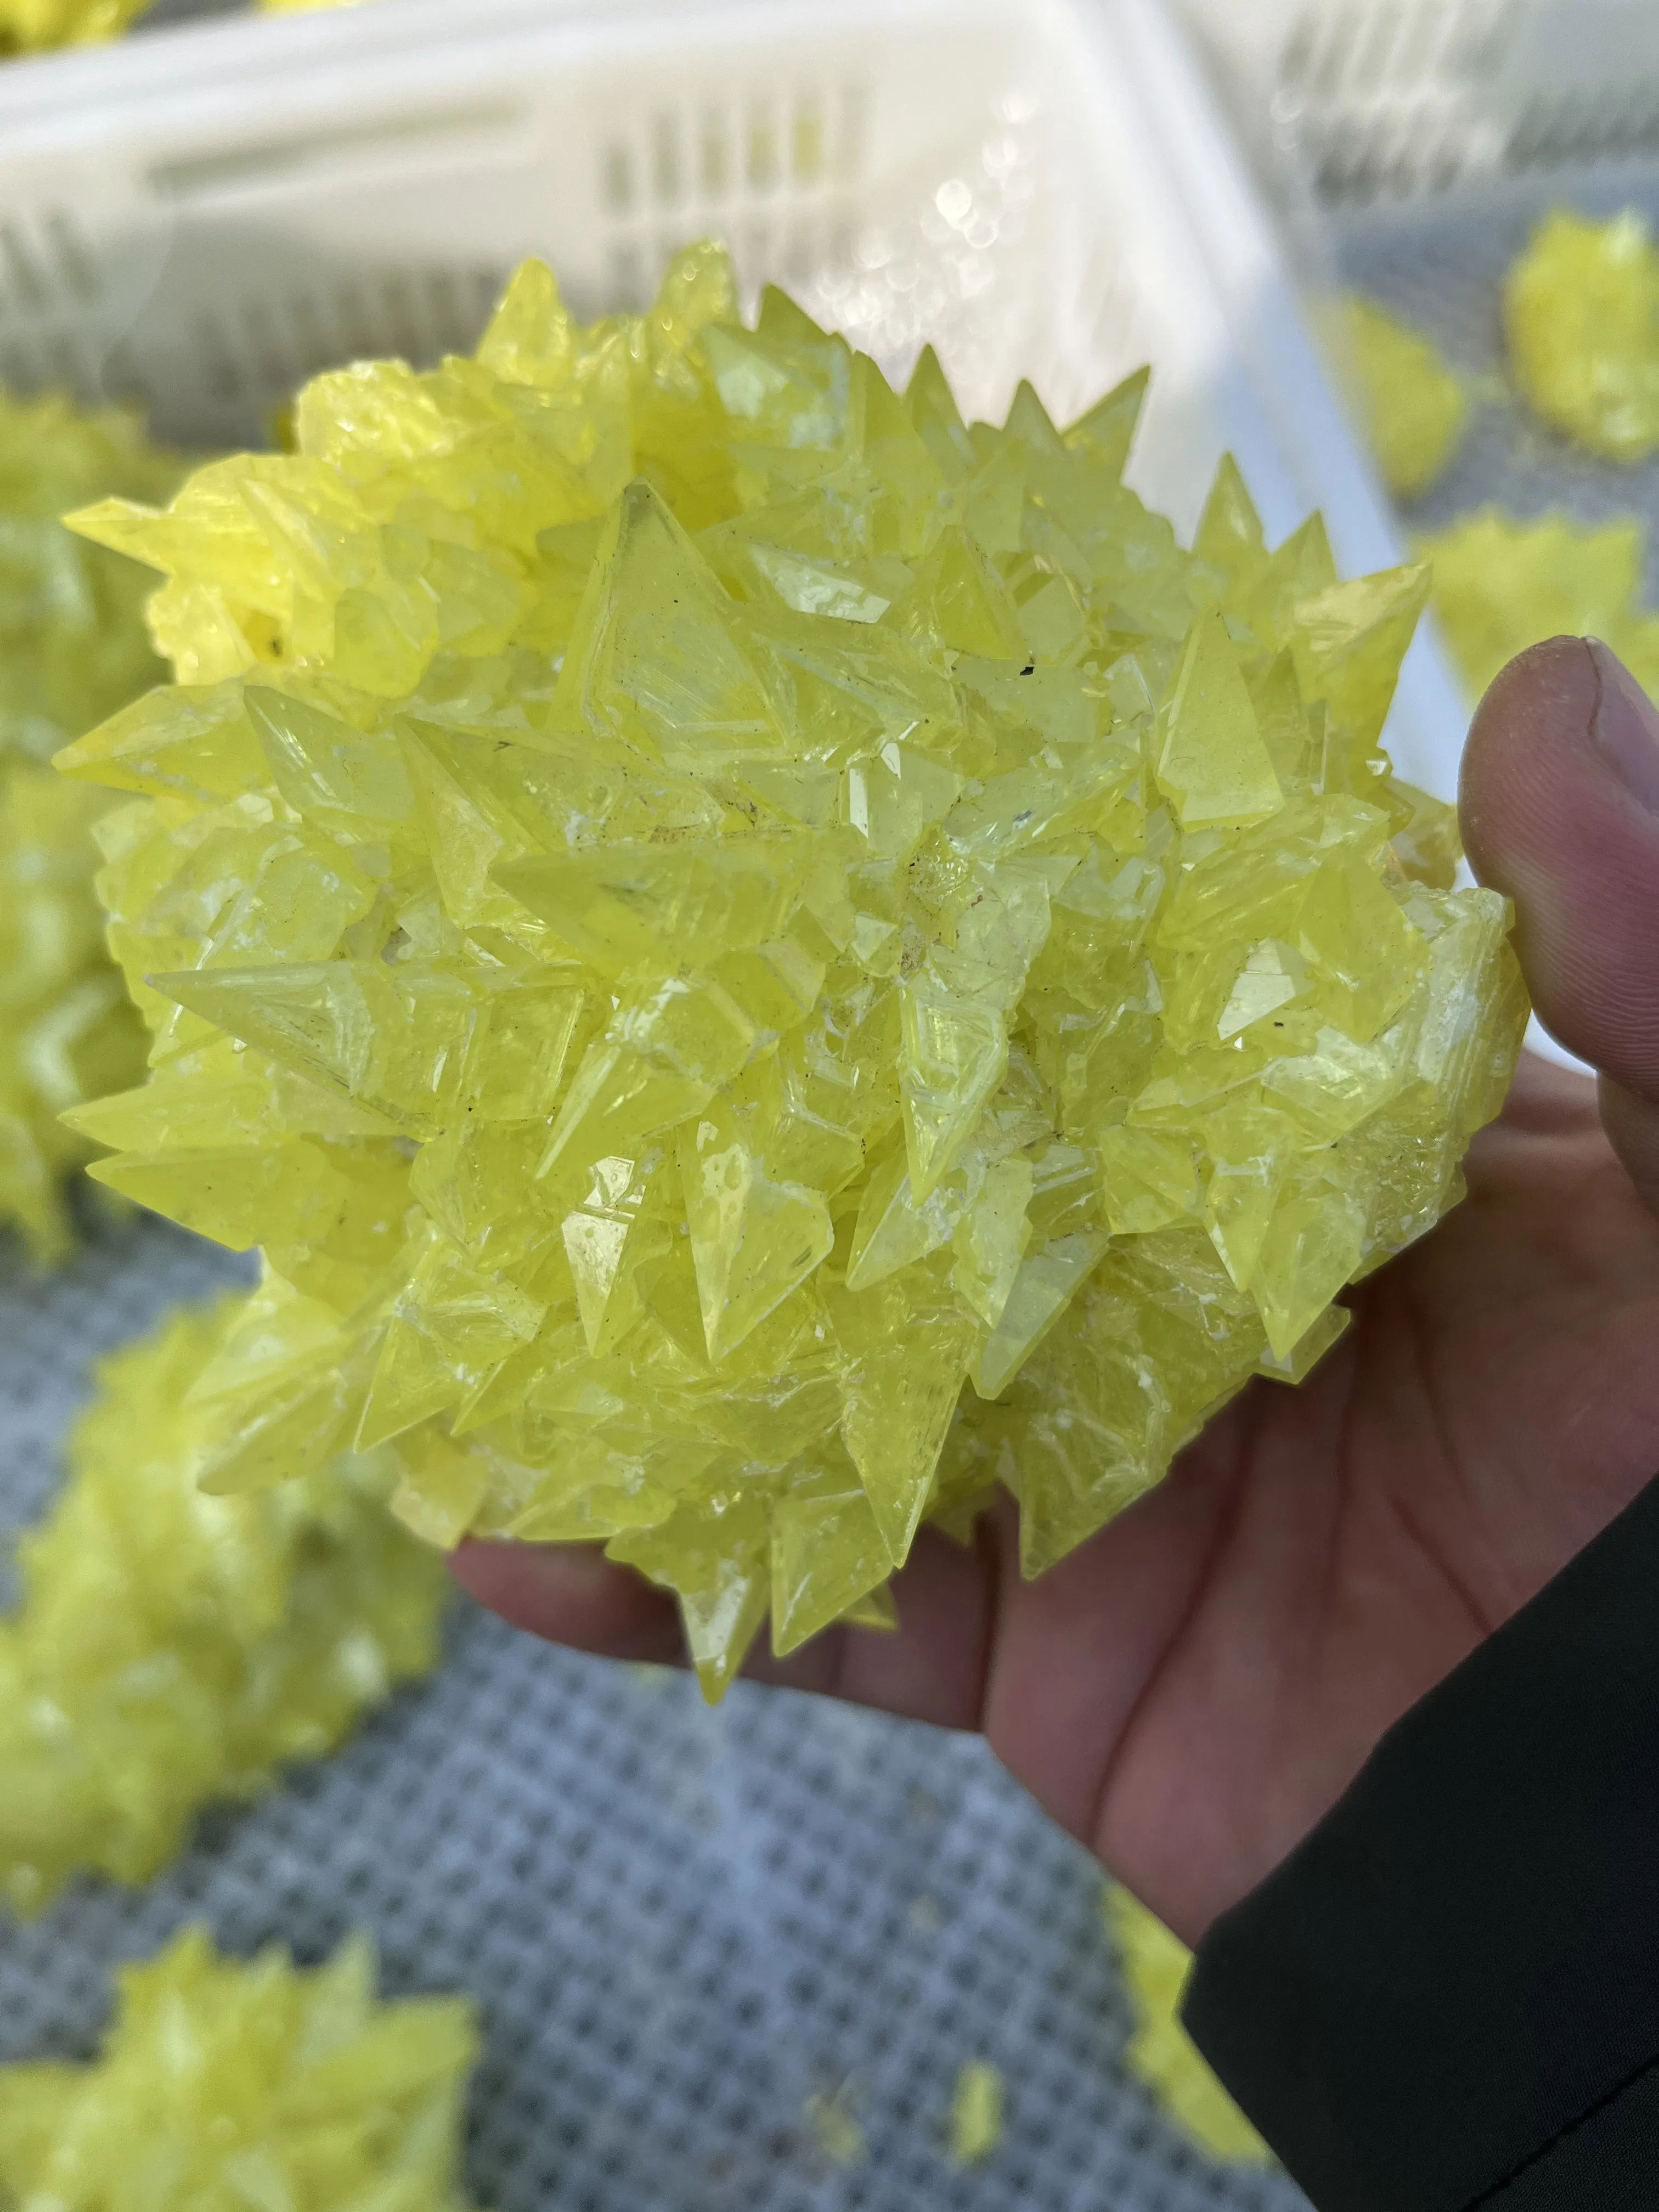 1Kg Natural Crystal Original Stone Ore Sulfur And White Crystal Symbiont Rare Mineral Is Very Fun Collection